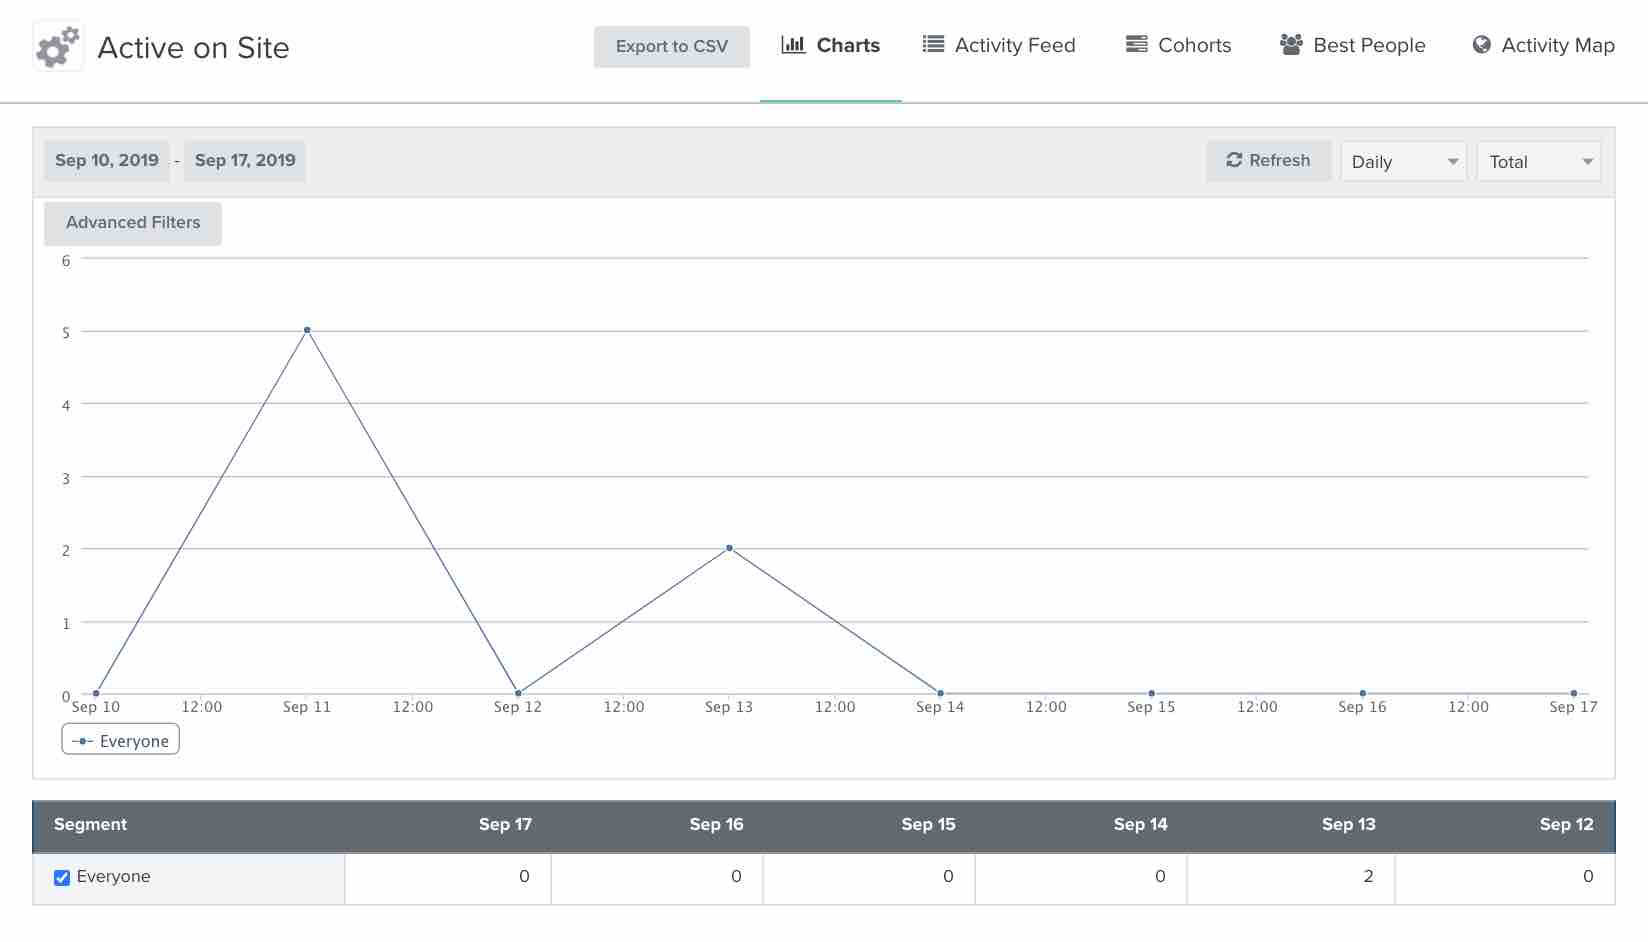 An example of a chart showing a line graph with those active on site over 7 days